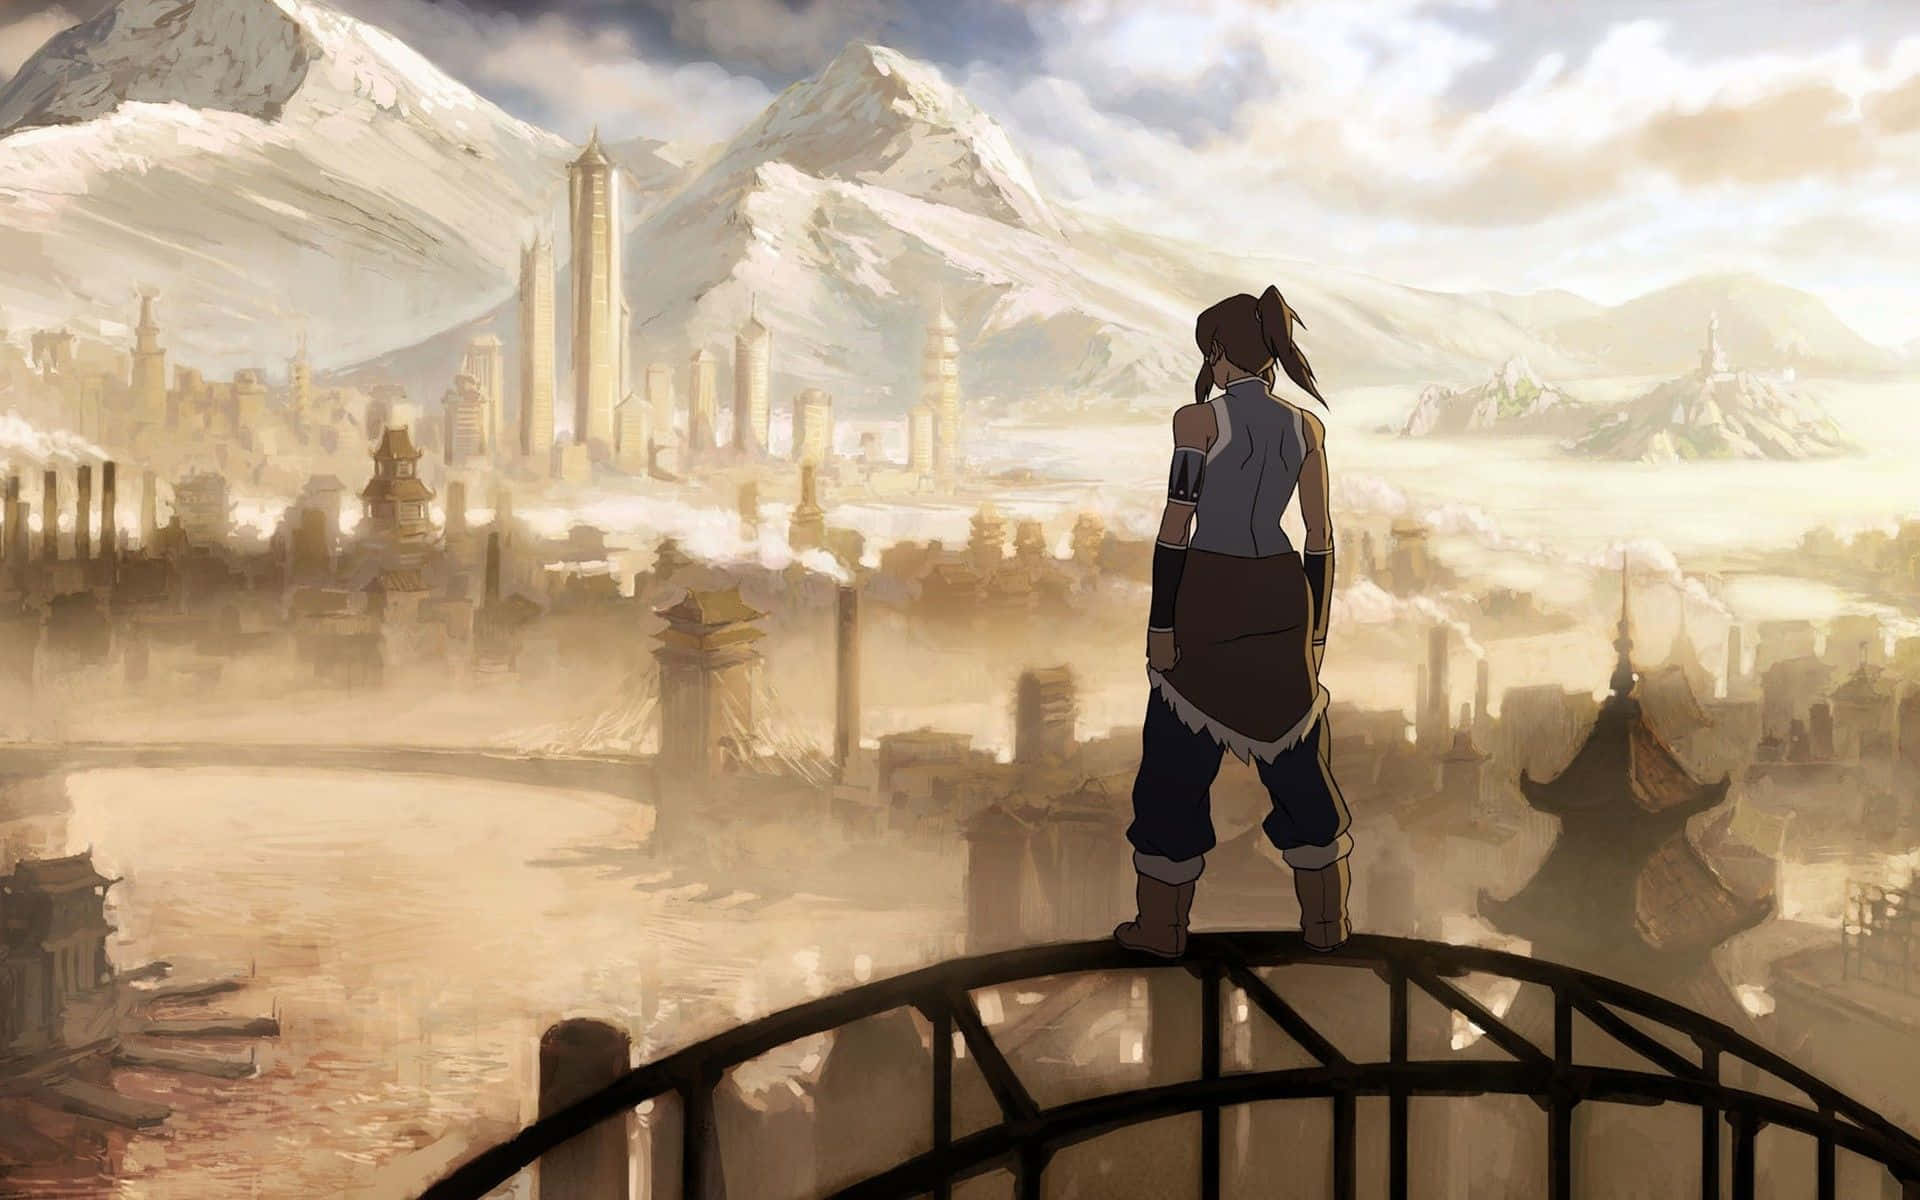 Korra, The Avatar And The Protector Of Republic City